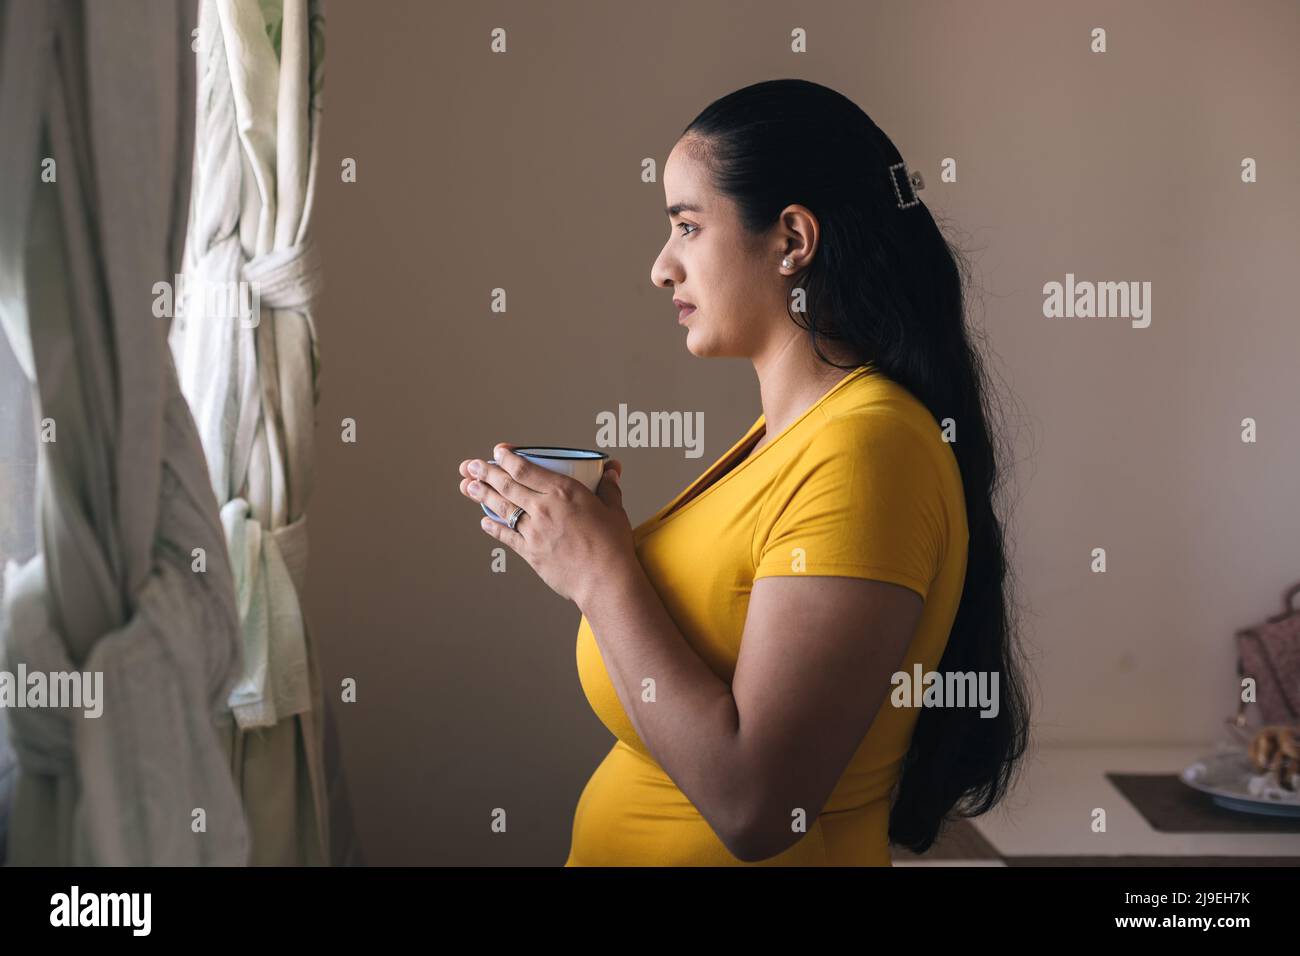 woman in yellow sweater looking out the window with cup in hand Stock Photo